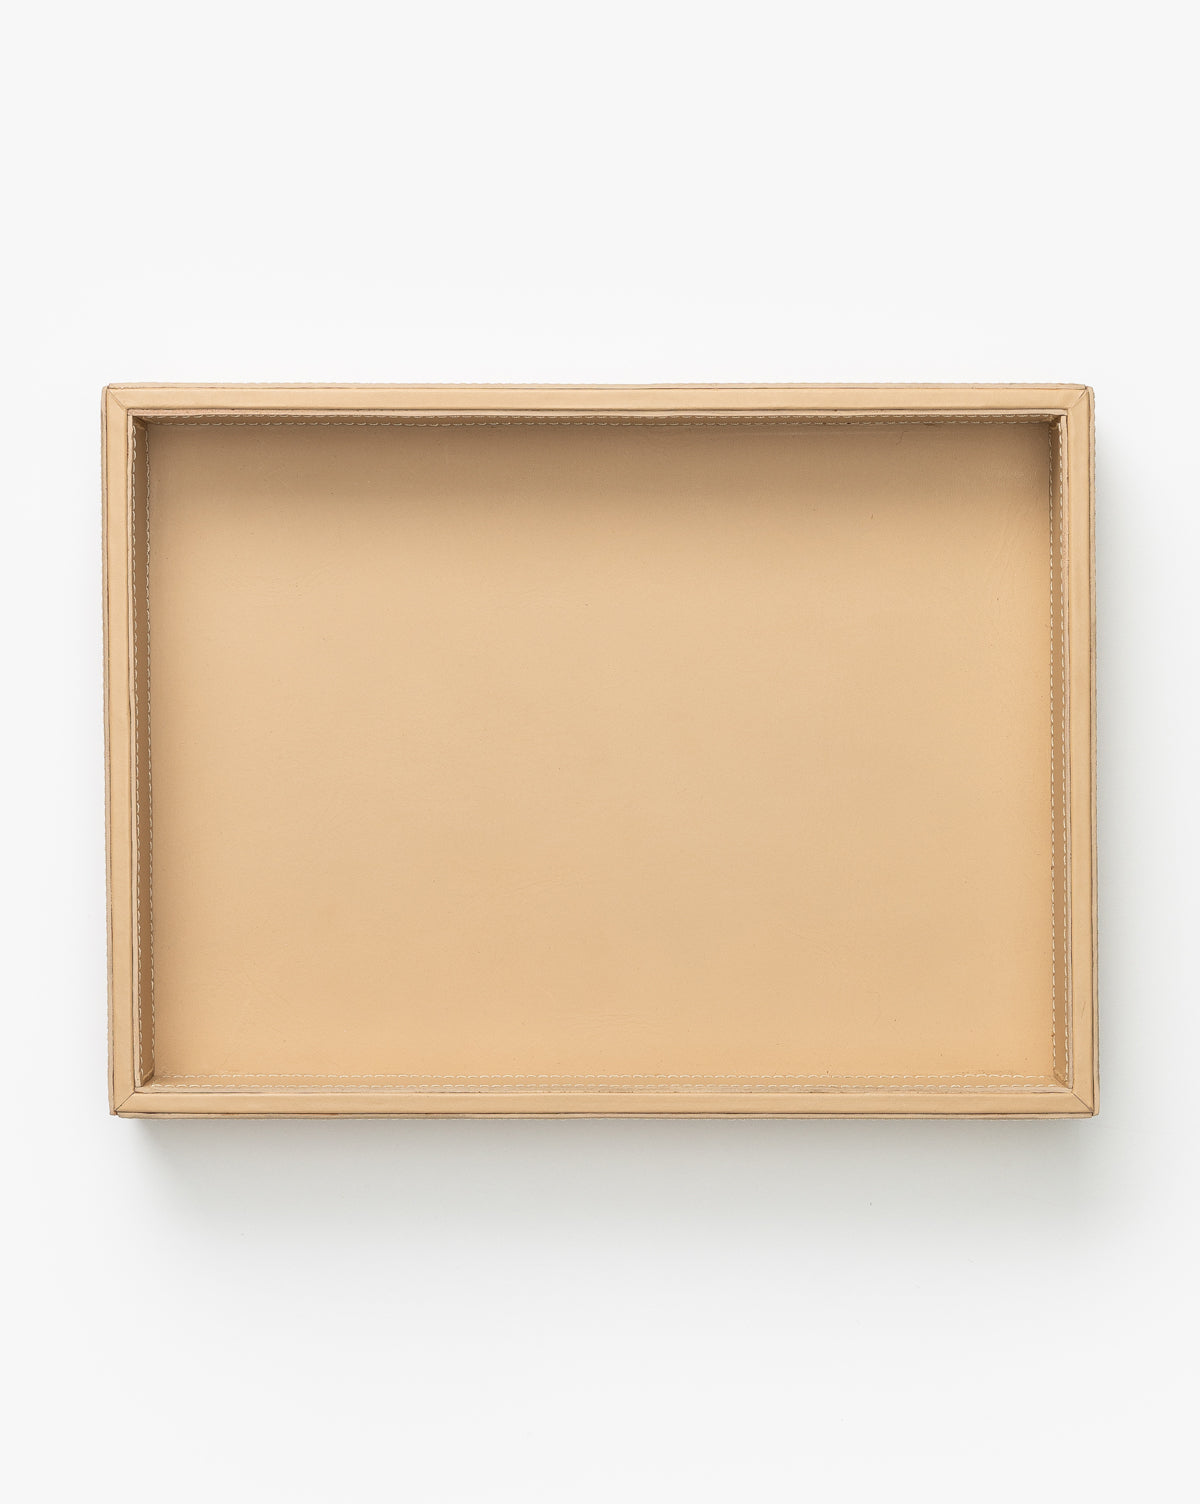 Credence, Rupert Leather Letter Tray